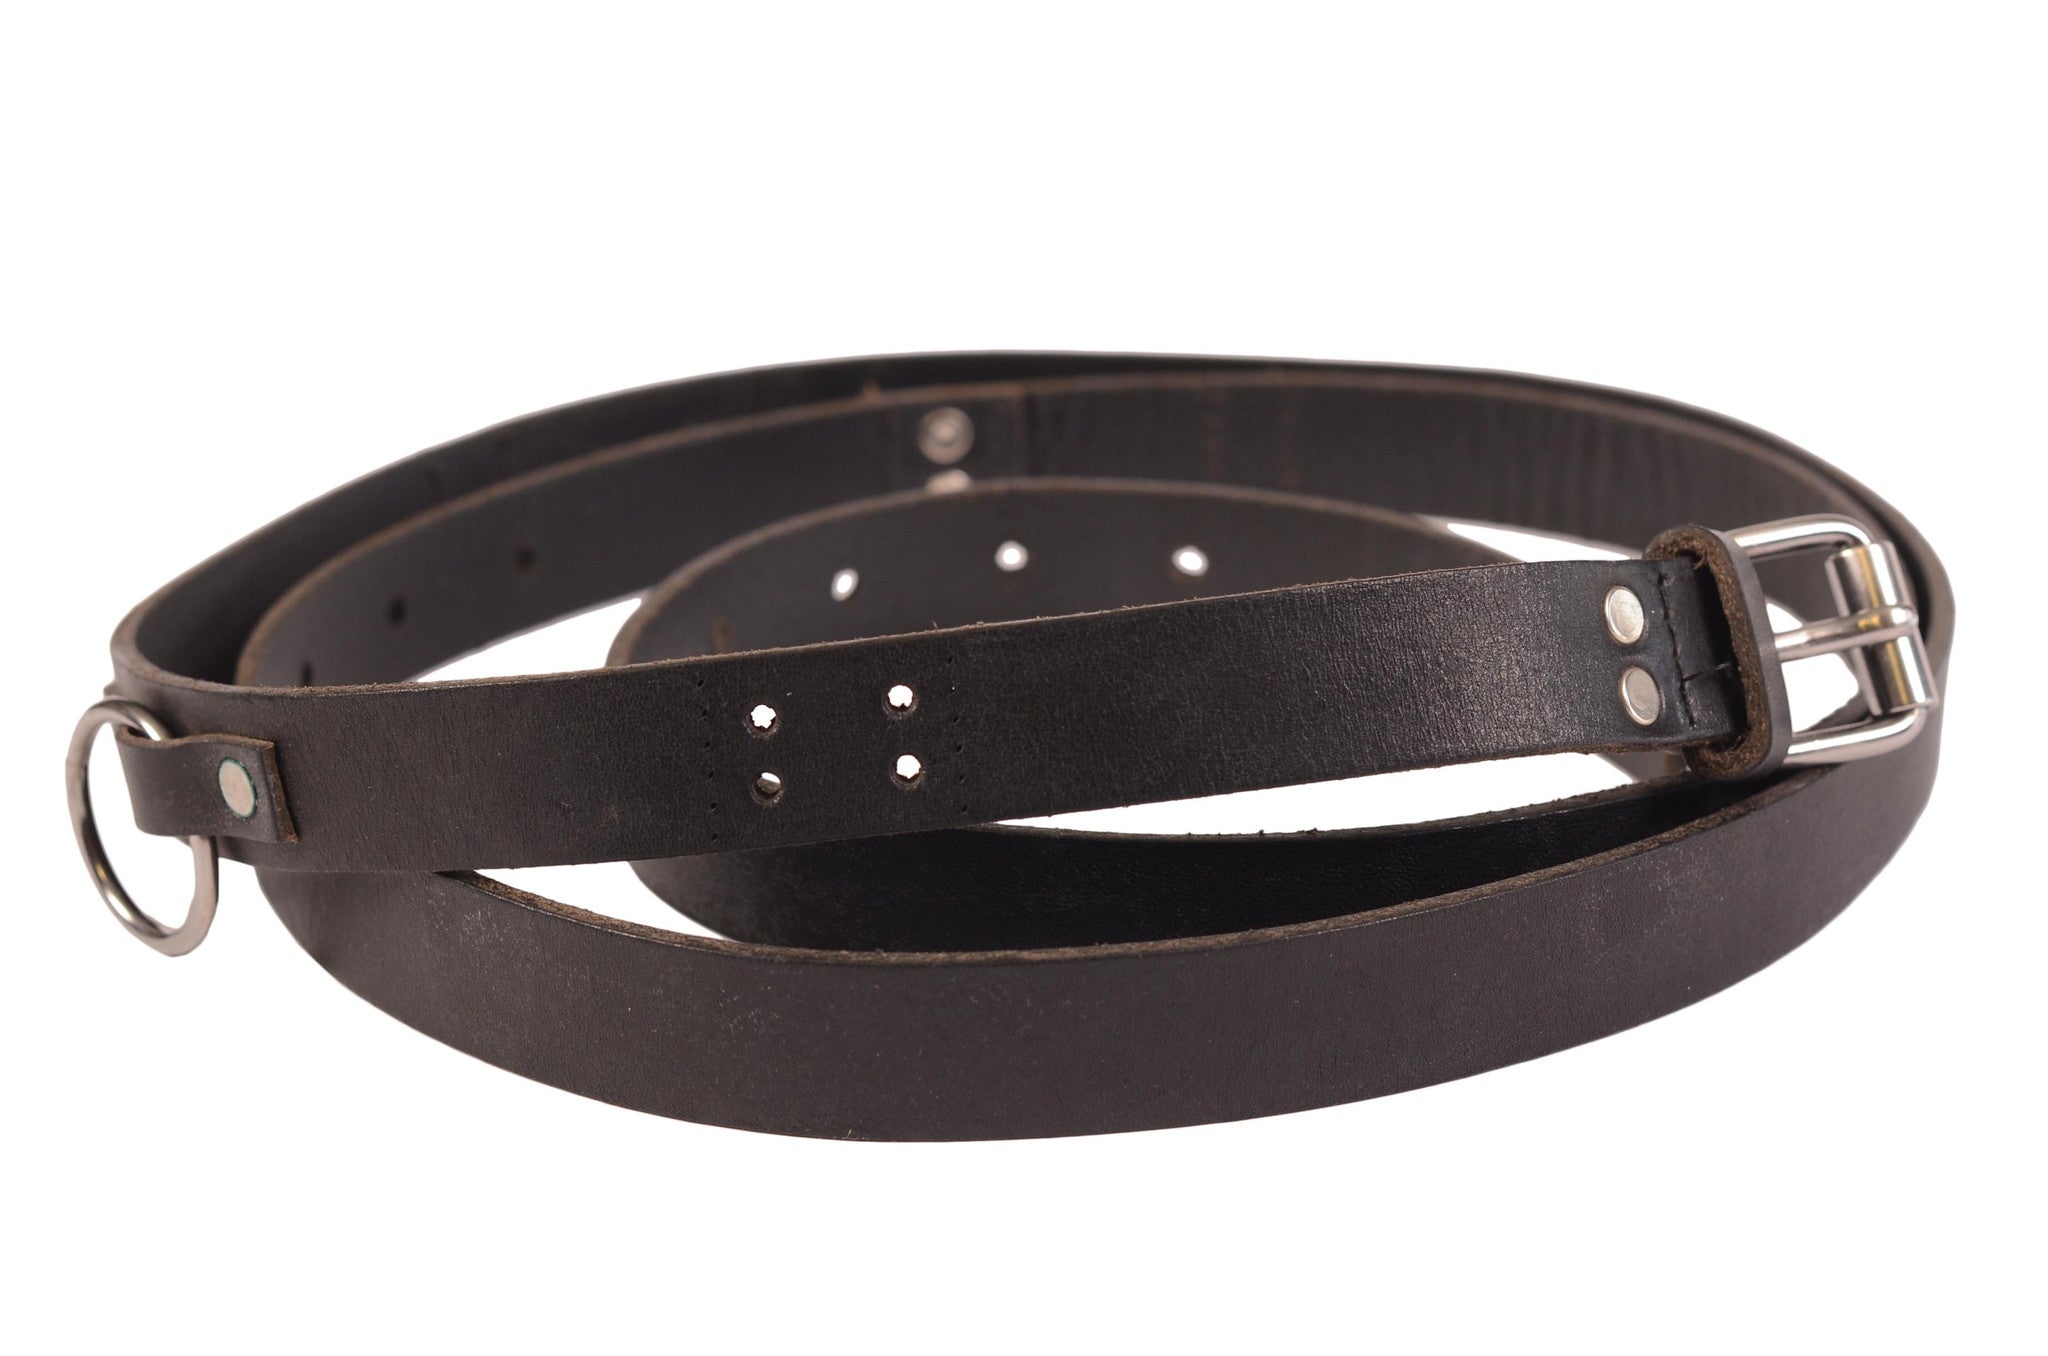 DIRK BIKKEMBERGS Black Leather Thin Long Belt with Tang Buckle Size 54/ 95cm/37"